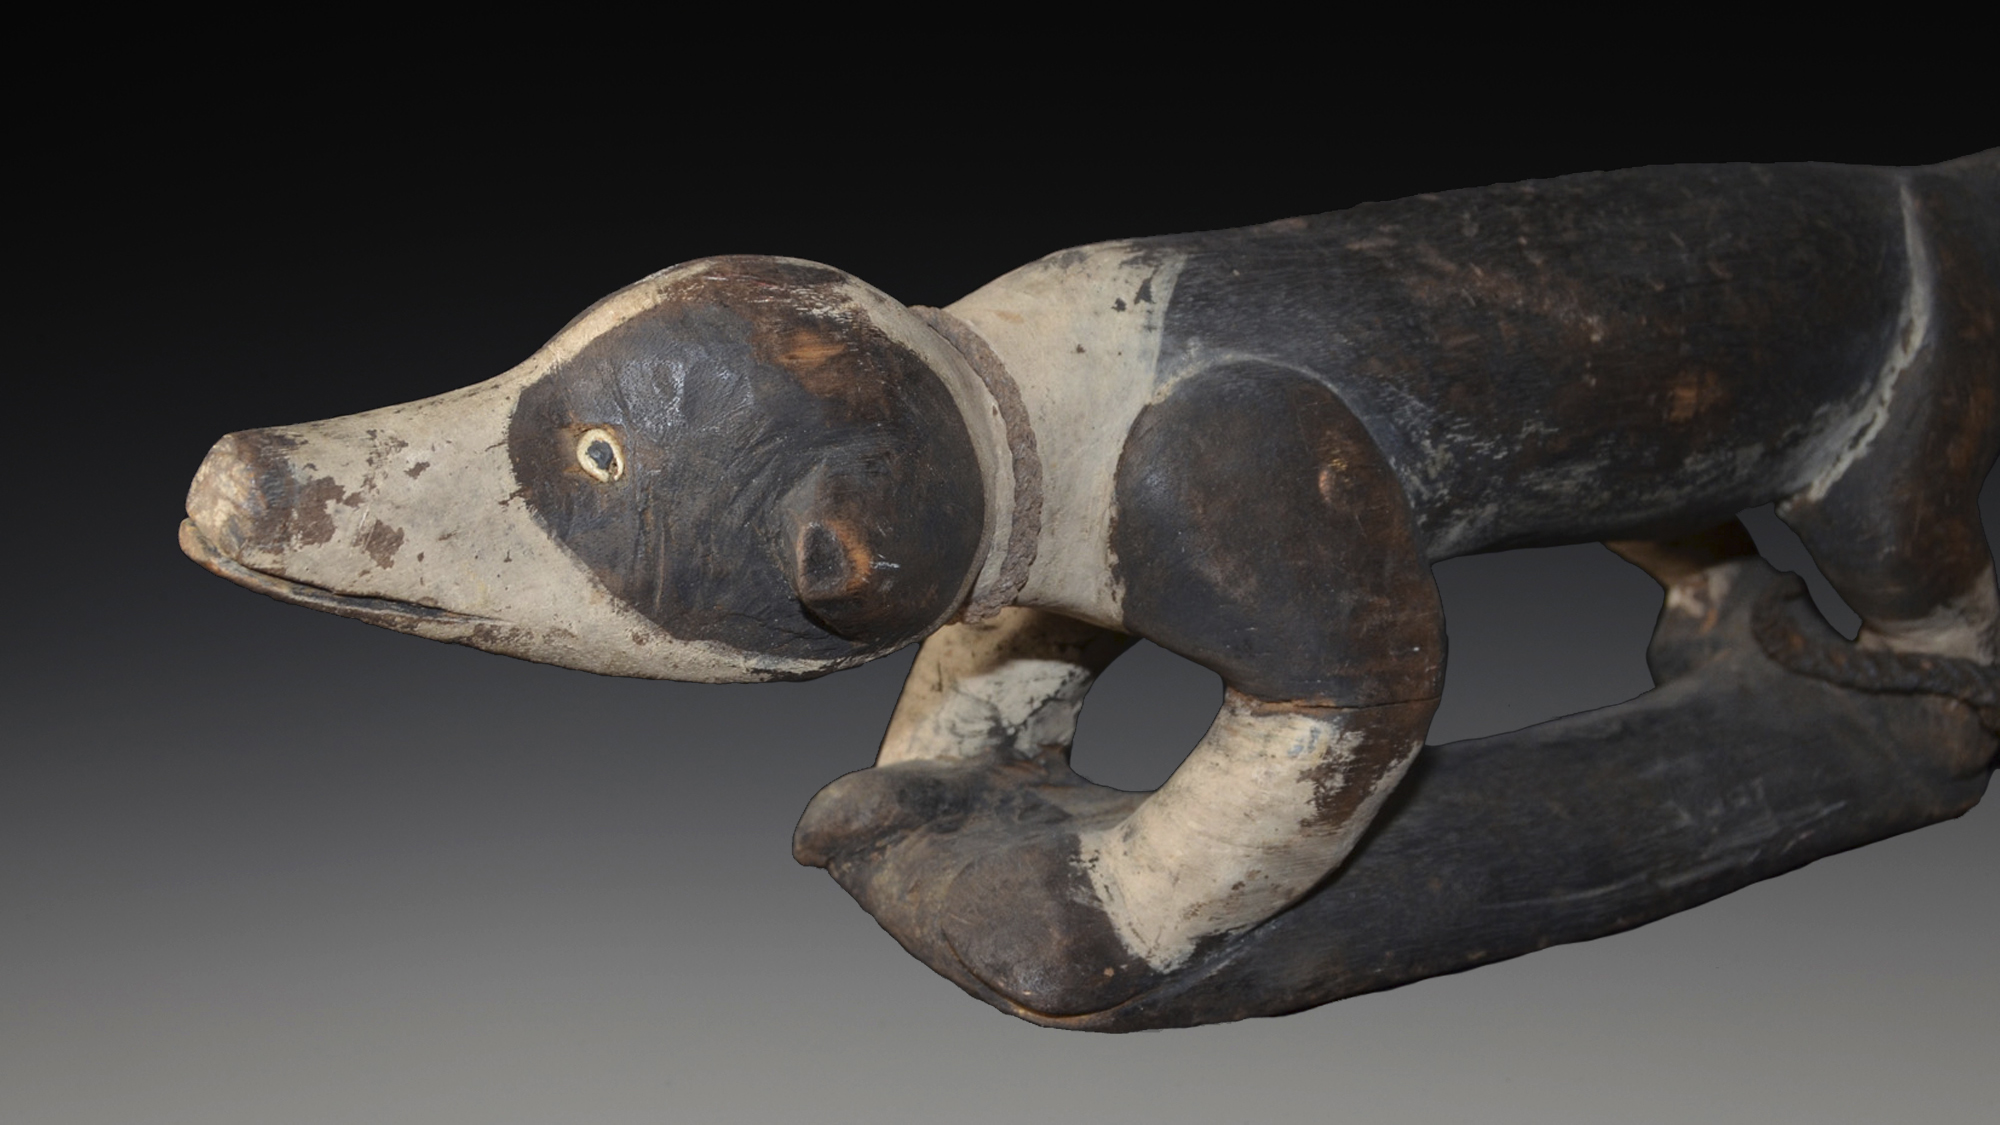 An old Sepik River Neckrest in the form of a Dog